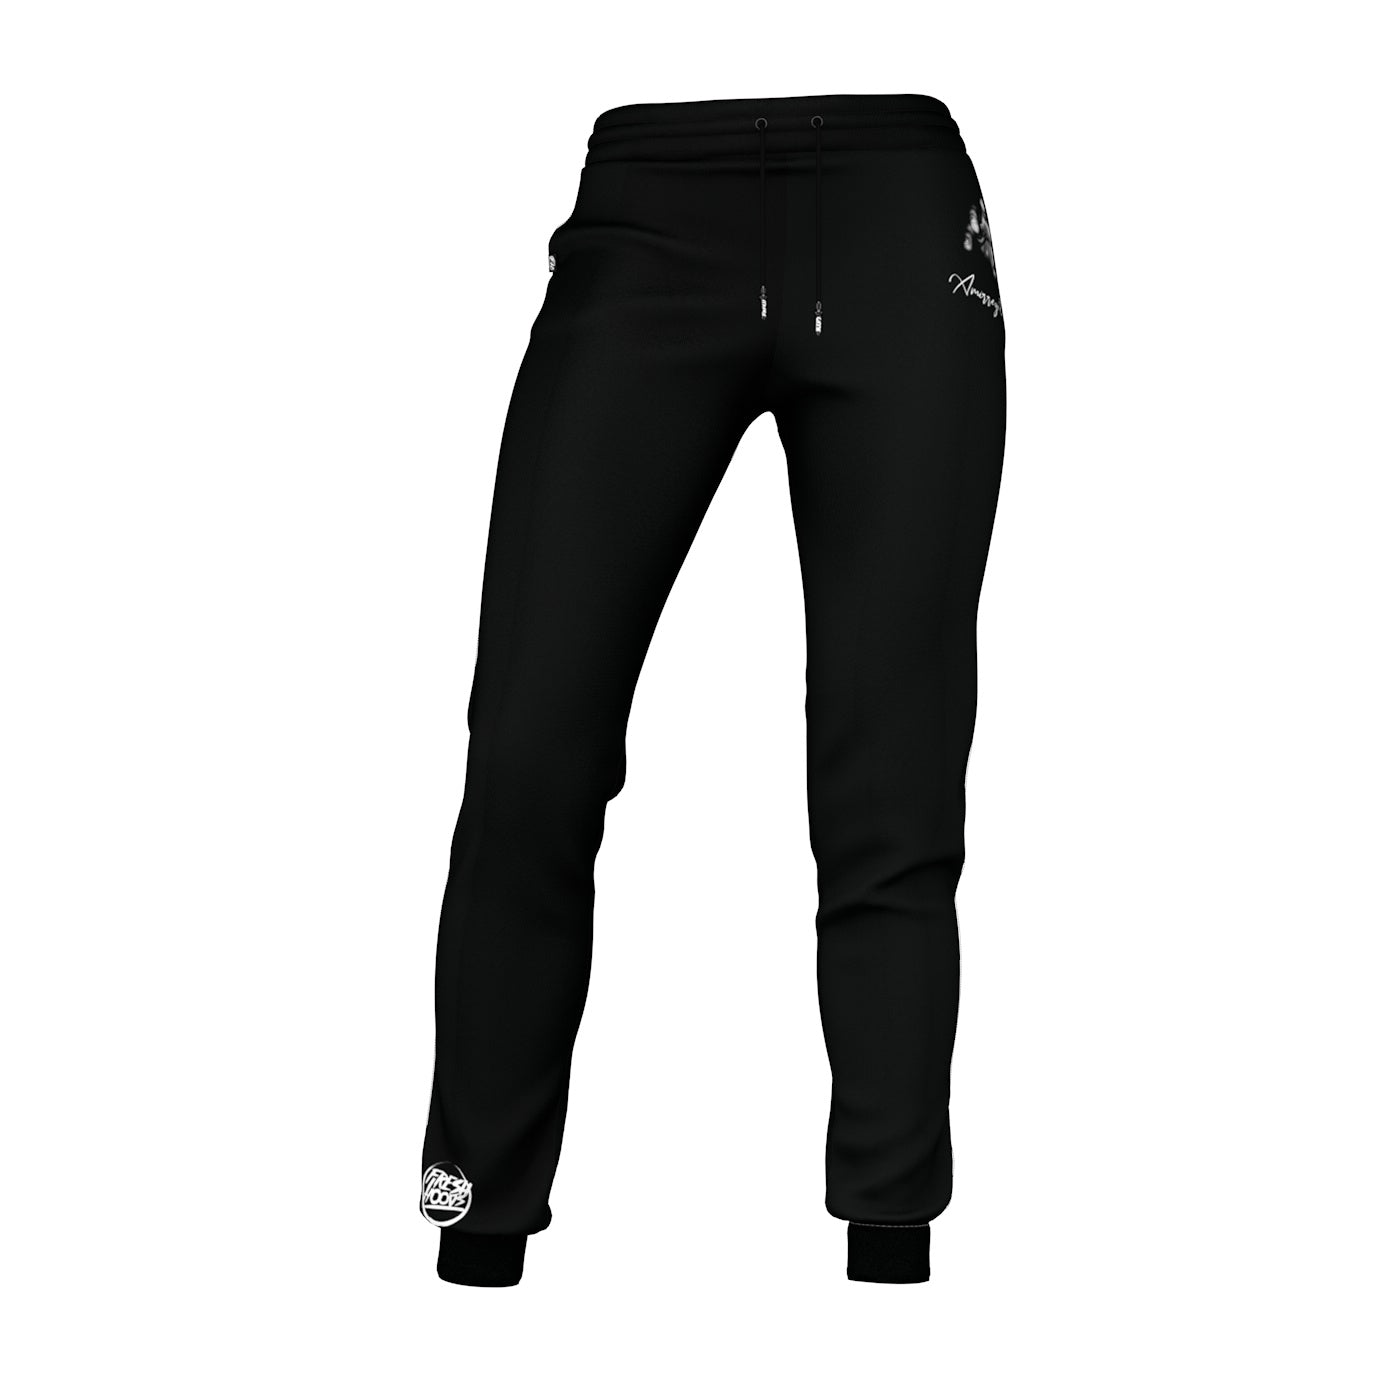 The Other Side Women Sweatpants